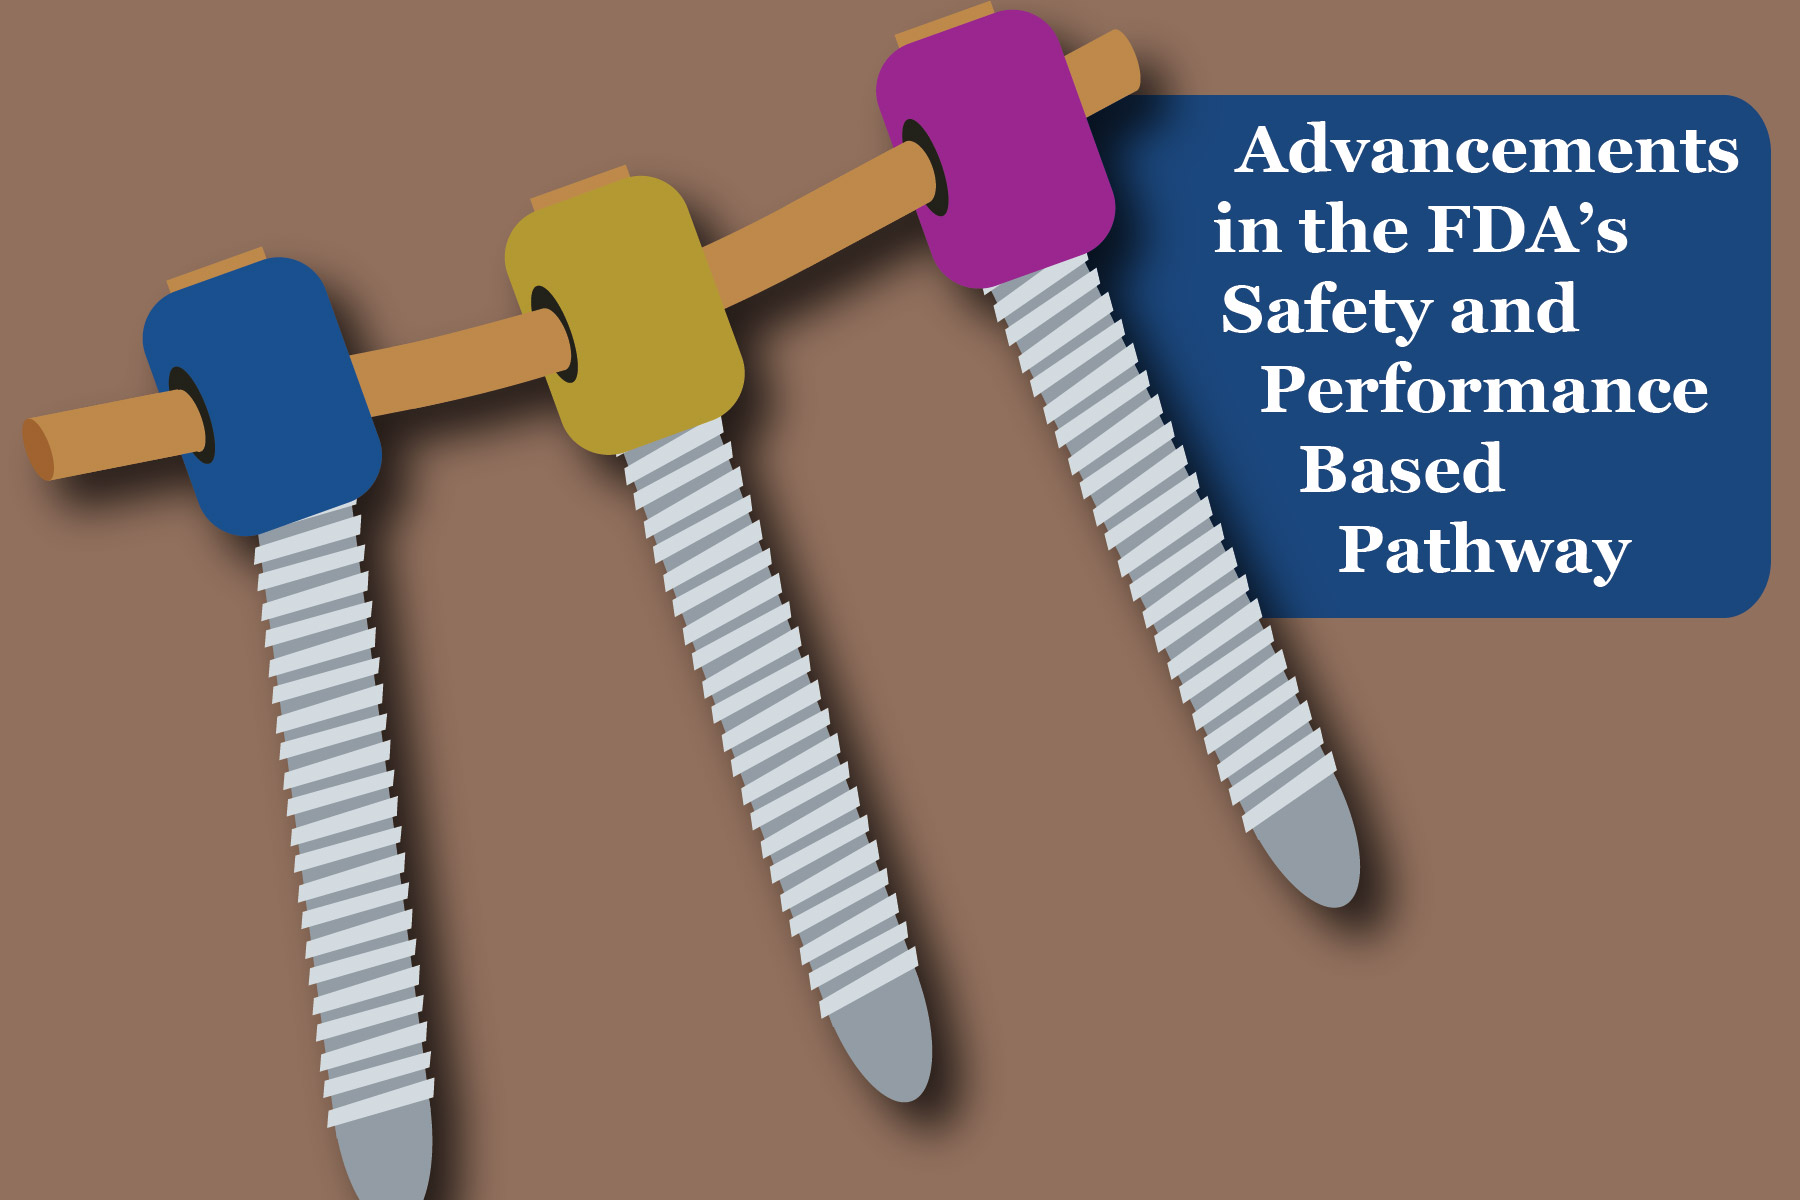 Advancements in the FDA’s Safety and Performance Based Pathway